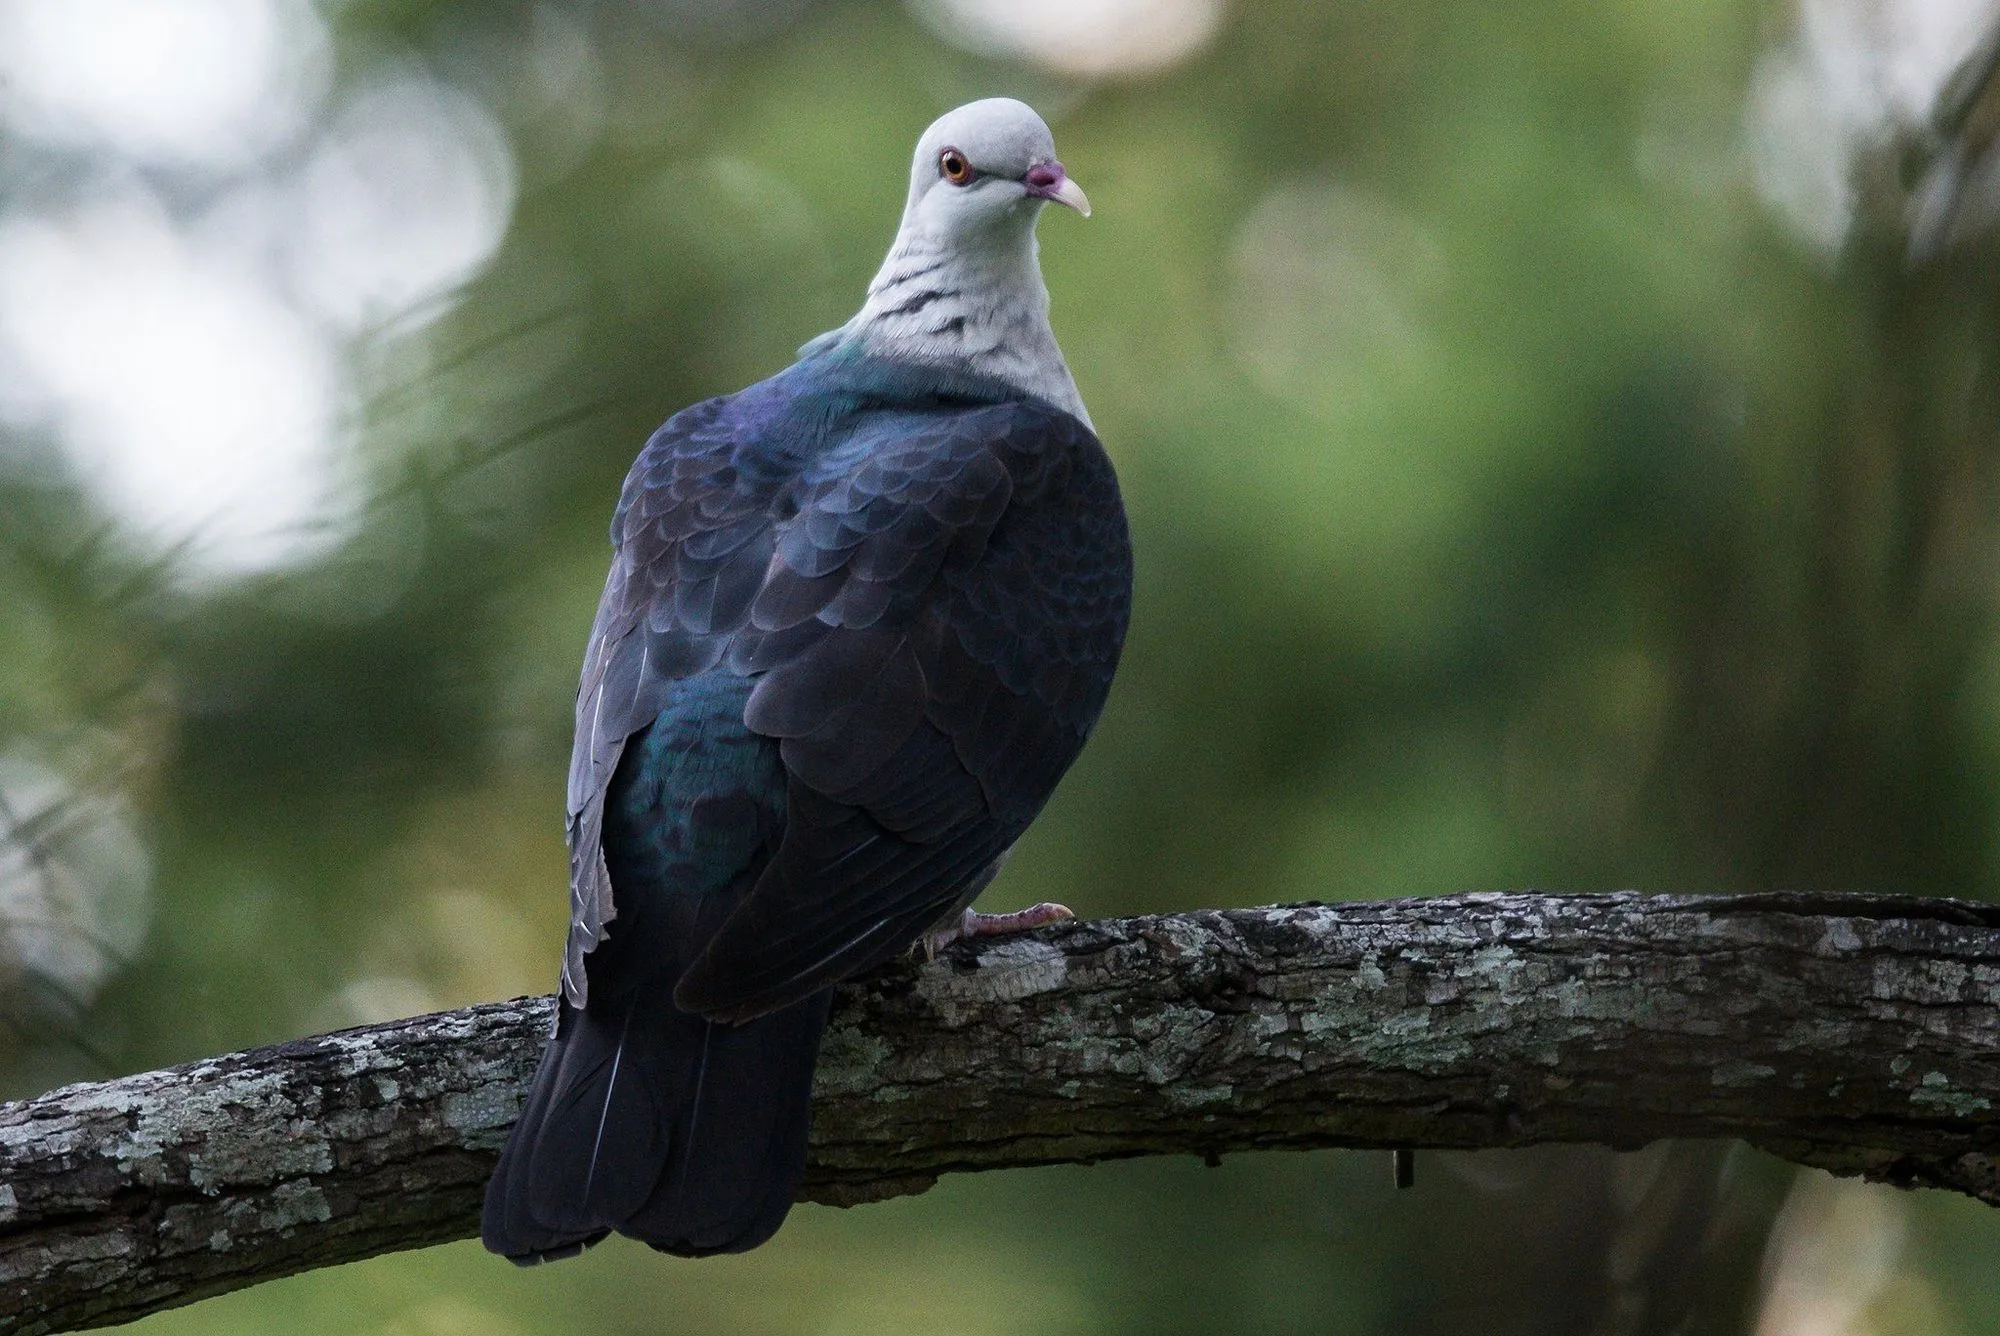 Check out these awesome white-headed pigeon facts.